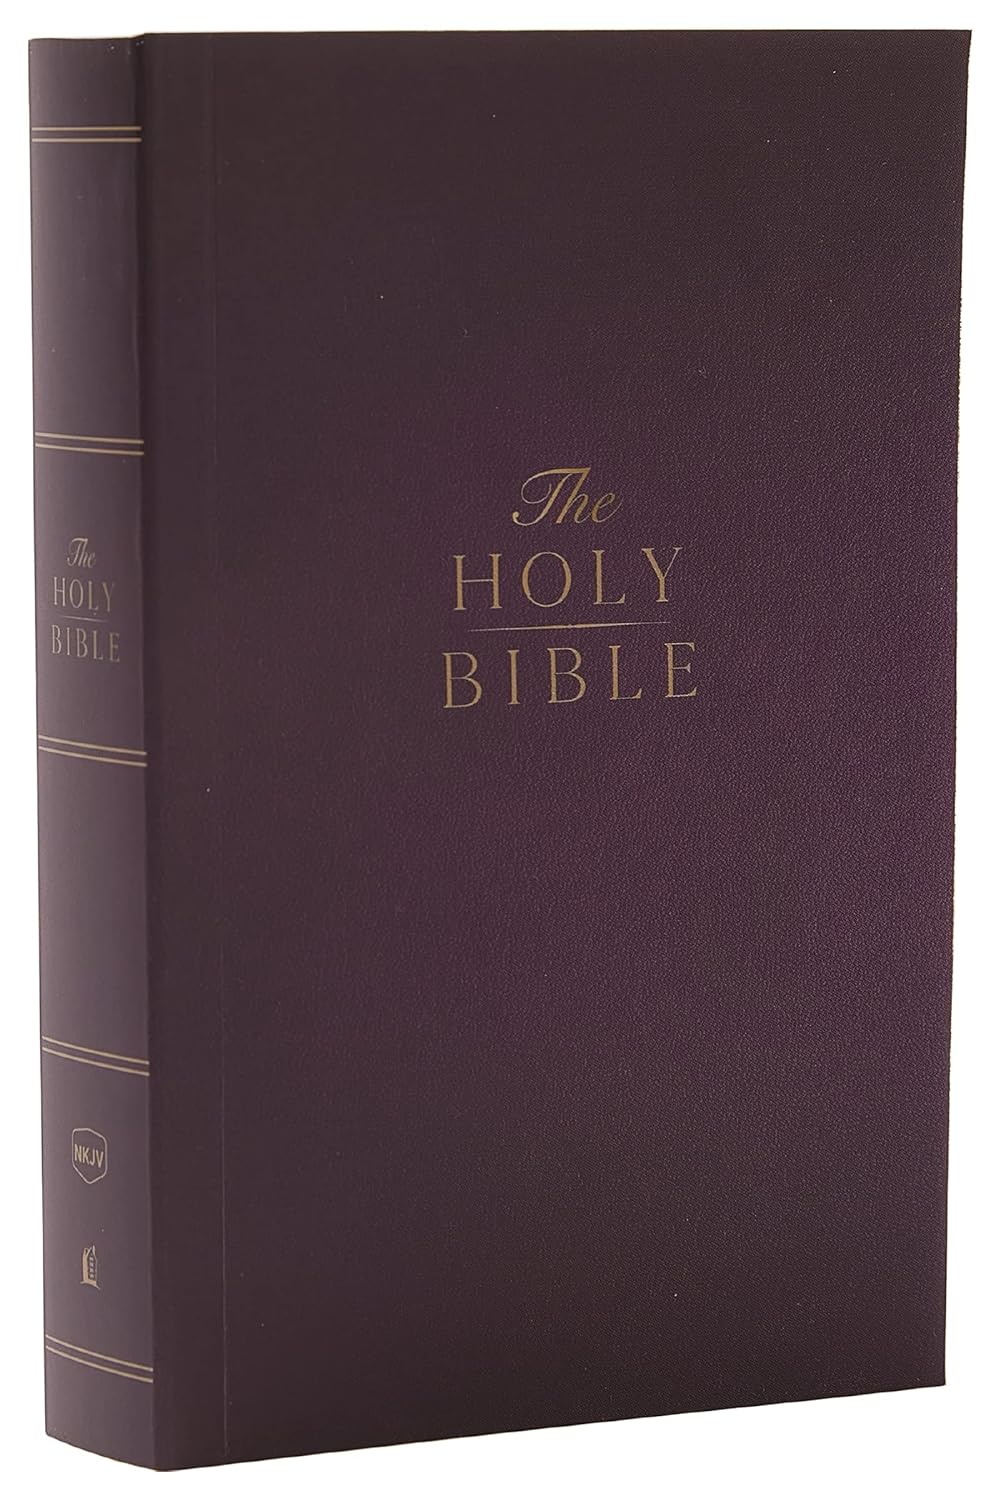 NKJV Compact Paragraph-Style Bible w/ 43,000 Cross References, Purple Softcover, Red Letter, Comfort Print: Holy Bible, New King James Version: Holy Bible, New King James Version Paperback – Import